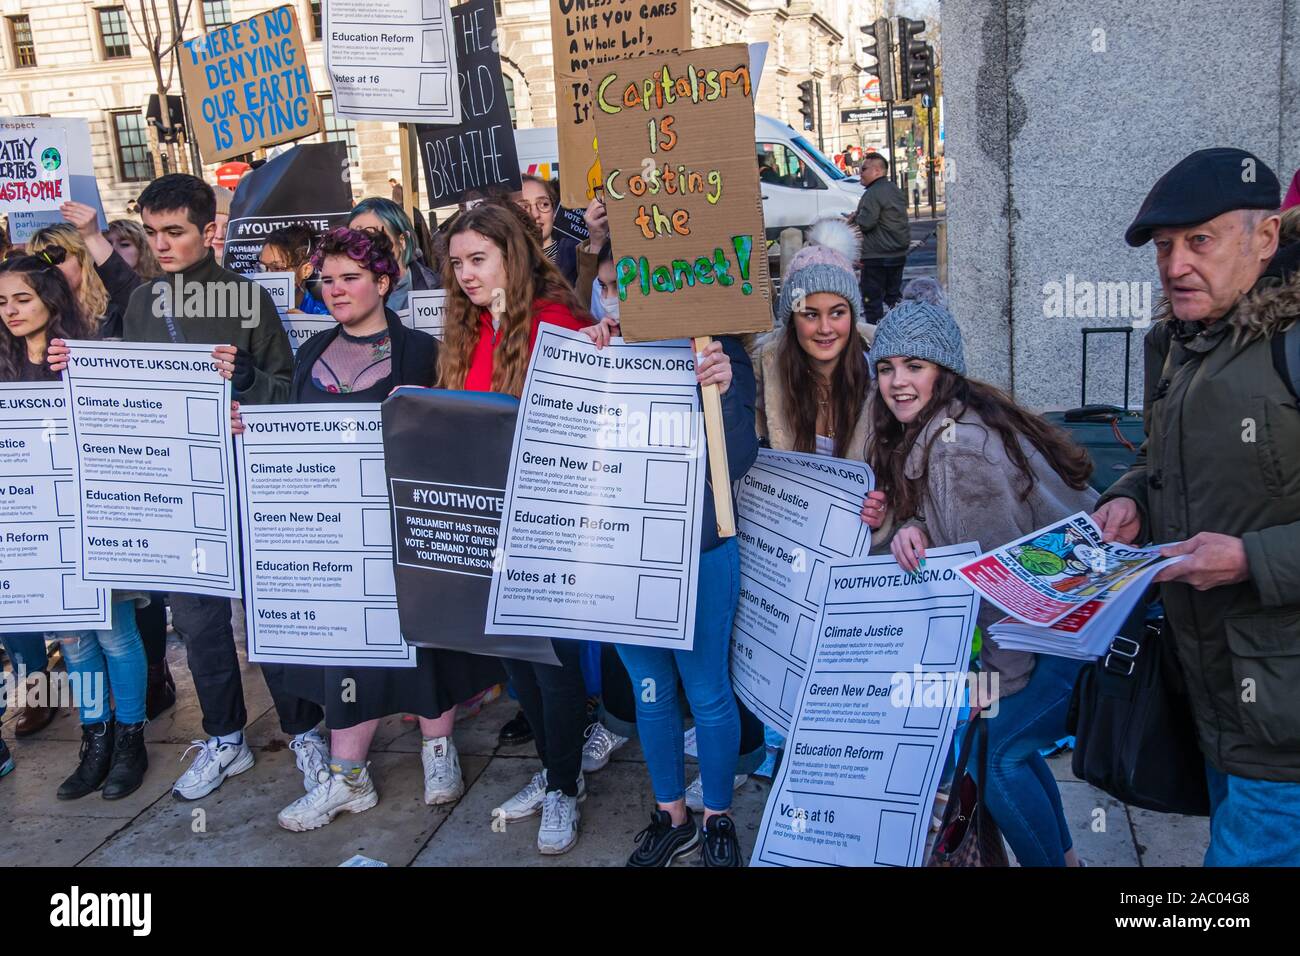 London, UK. 29th Nov, 2019. Students pose with posters listing their demands in Parliament Square before their march on Black Friday/Buy Nothing Day demanding urgent climate action. They demand a Green New Deal to save the future, a curriculum that teaches the future, for government to tell people the truth and for young people to be empowered and their views heard. Over a thousand marched up Whitehall but were stopped by police on Regent St, and led eventually back to Parliament Square were they met the UCU led march for Planet, Pay, Pensions. Credit: Peter Marshall/Alamy Live News Stock Photo